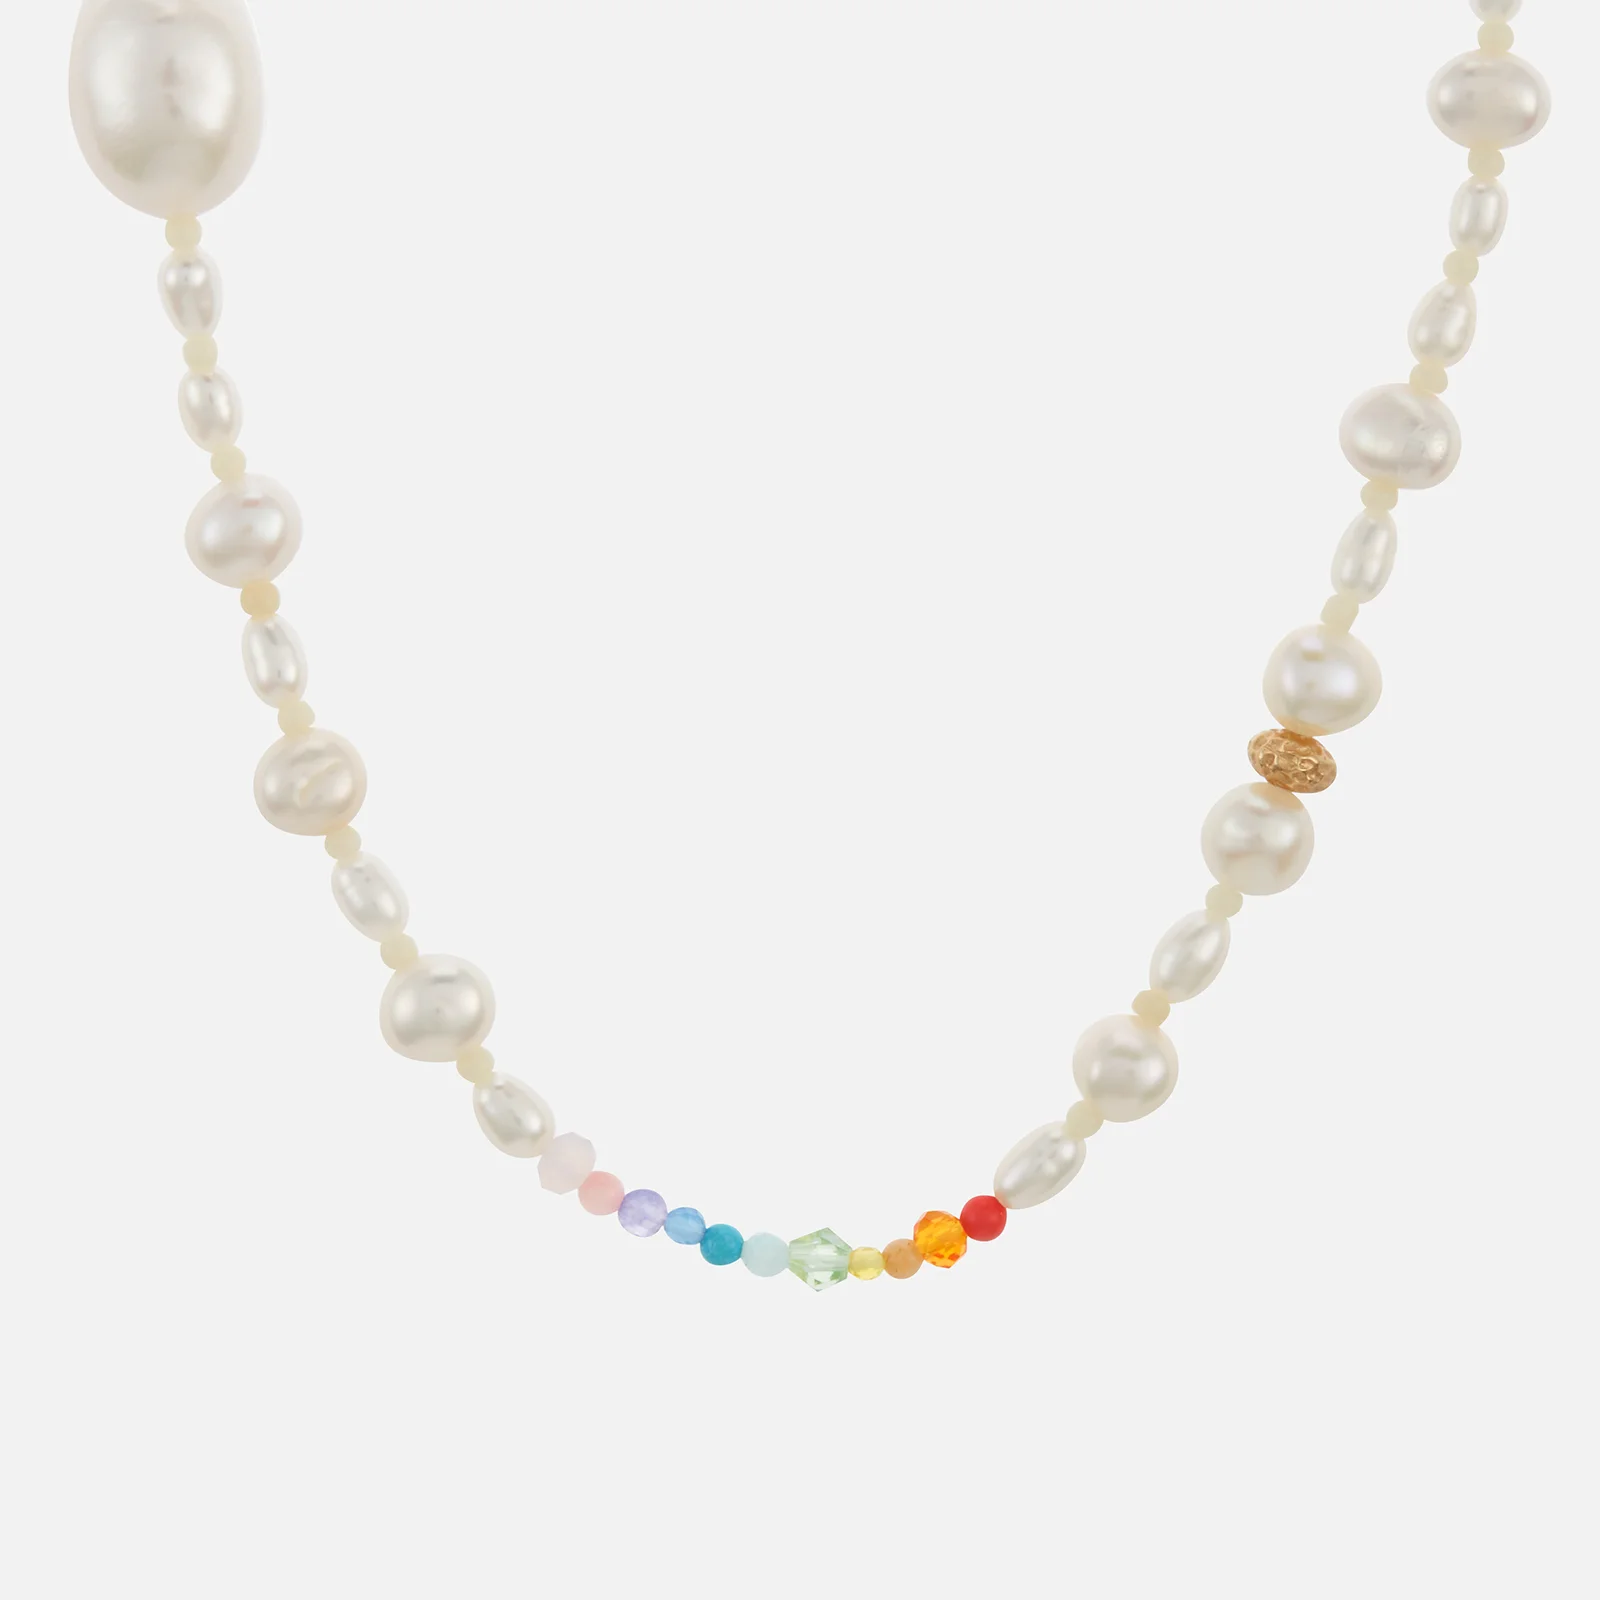 Anni Lu Gold-Tone, Glass Pearl and Bead Necklace Image 1